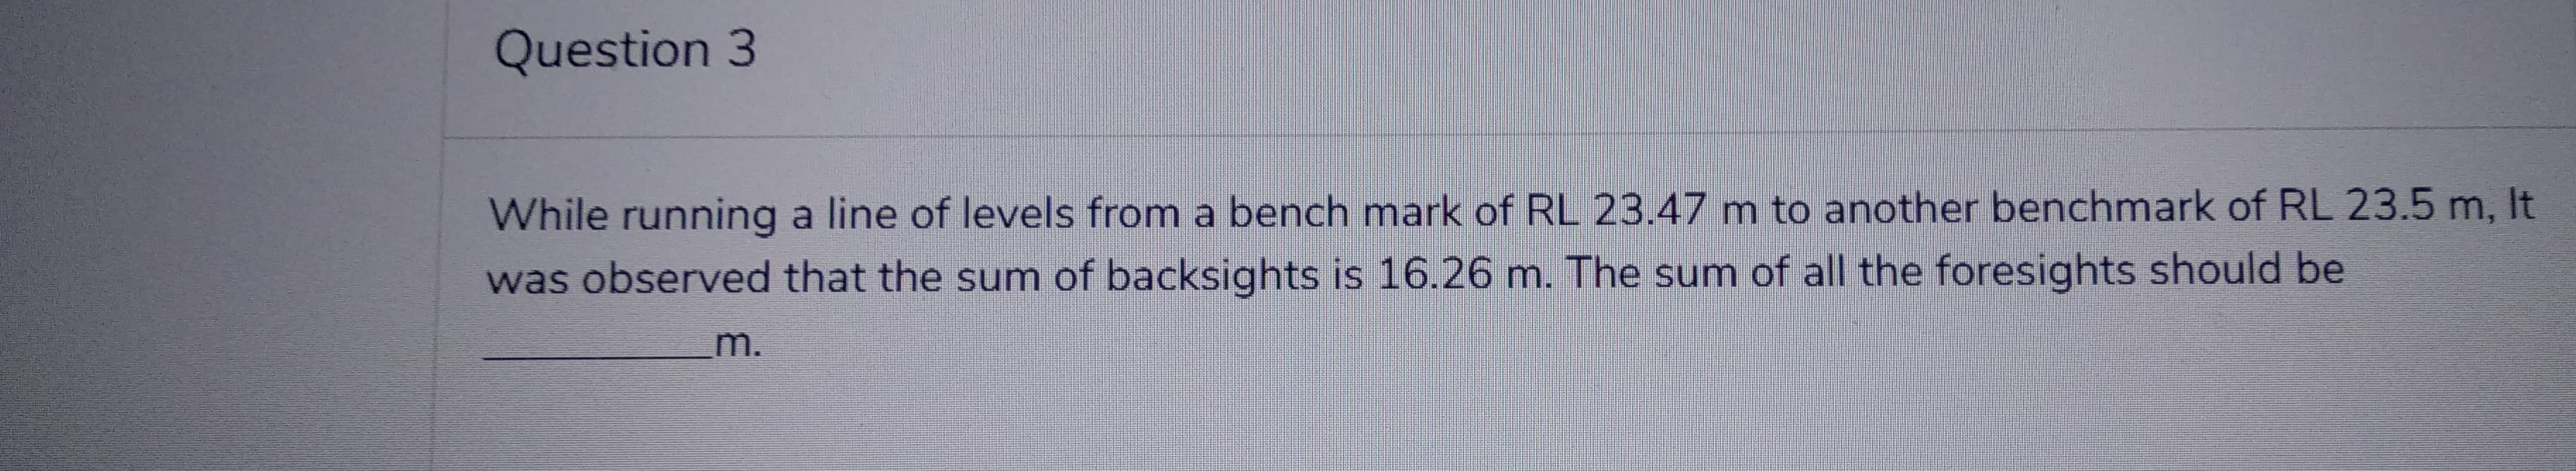 Question 3
While running a line of levels from a bench mark of RL 23.47 m to another benchmark of RL 23.5 m, It
was observed that the sum of backsights is 16.26 m. The sum of all the foresights should be